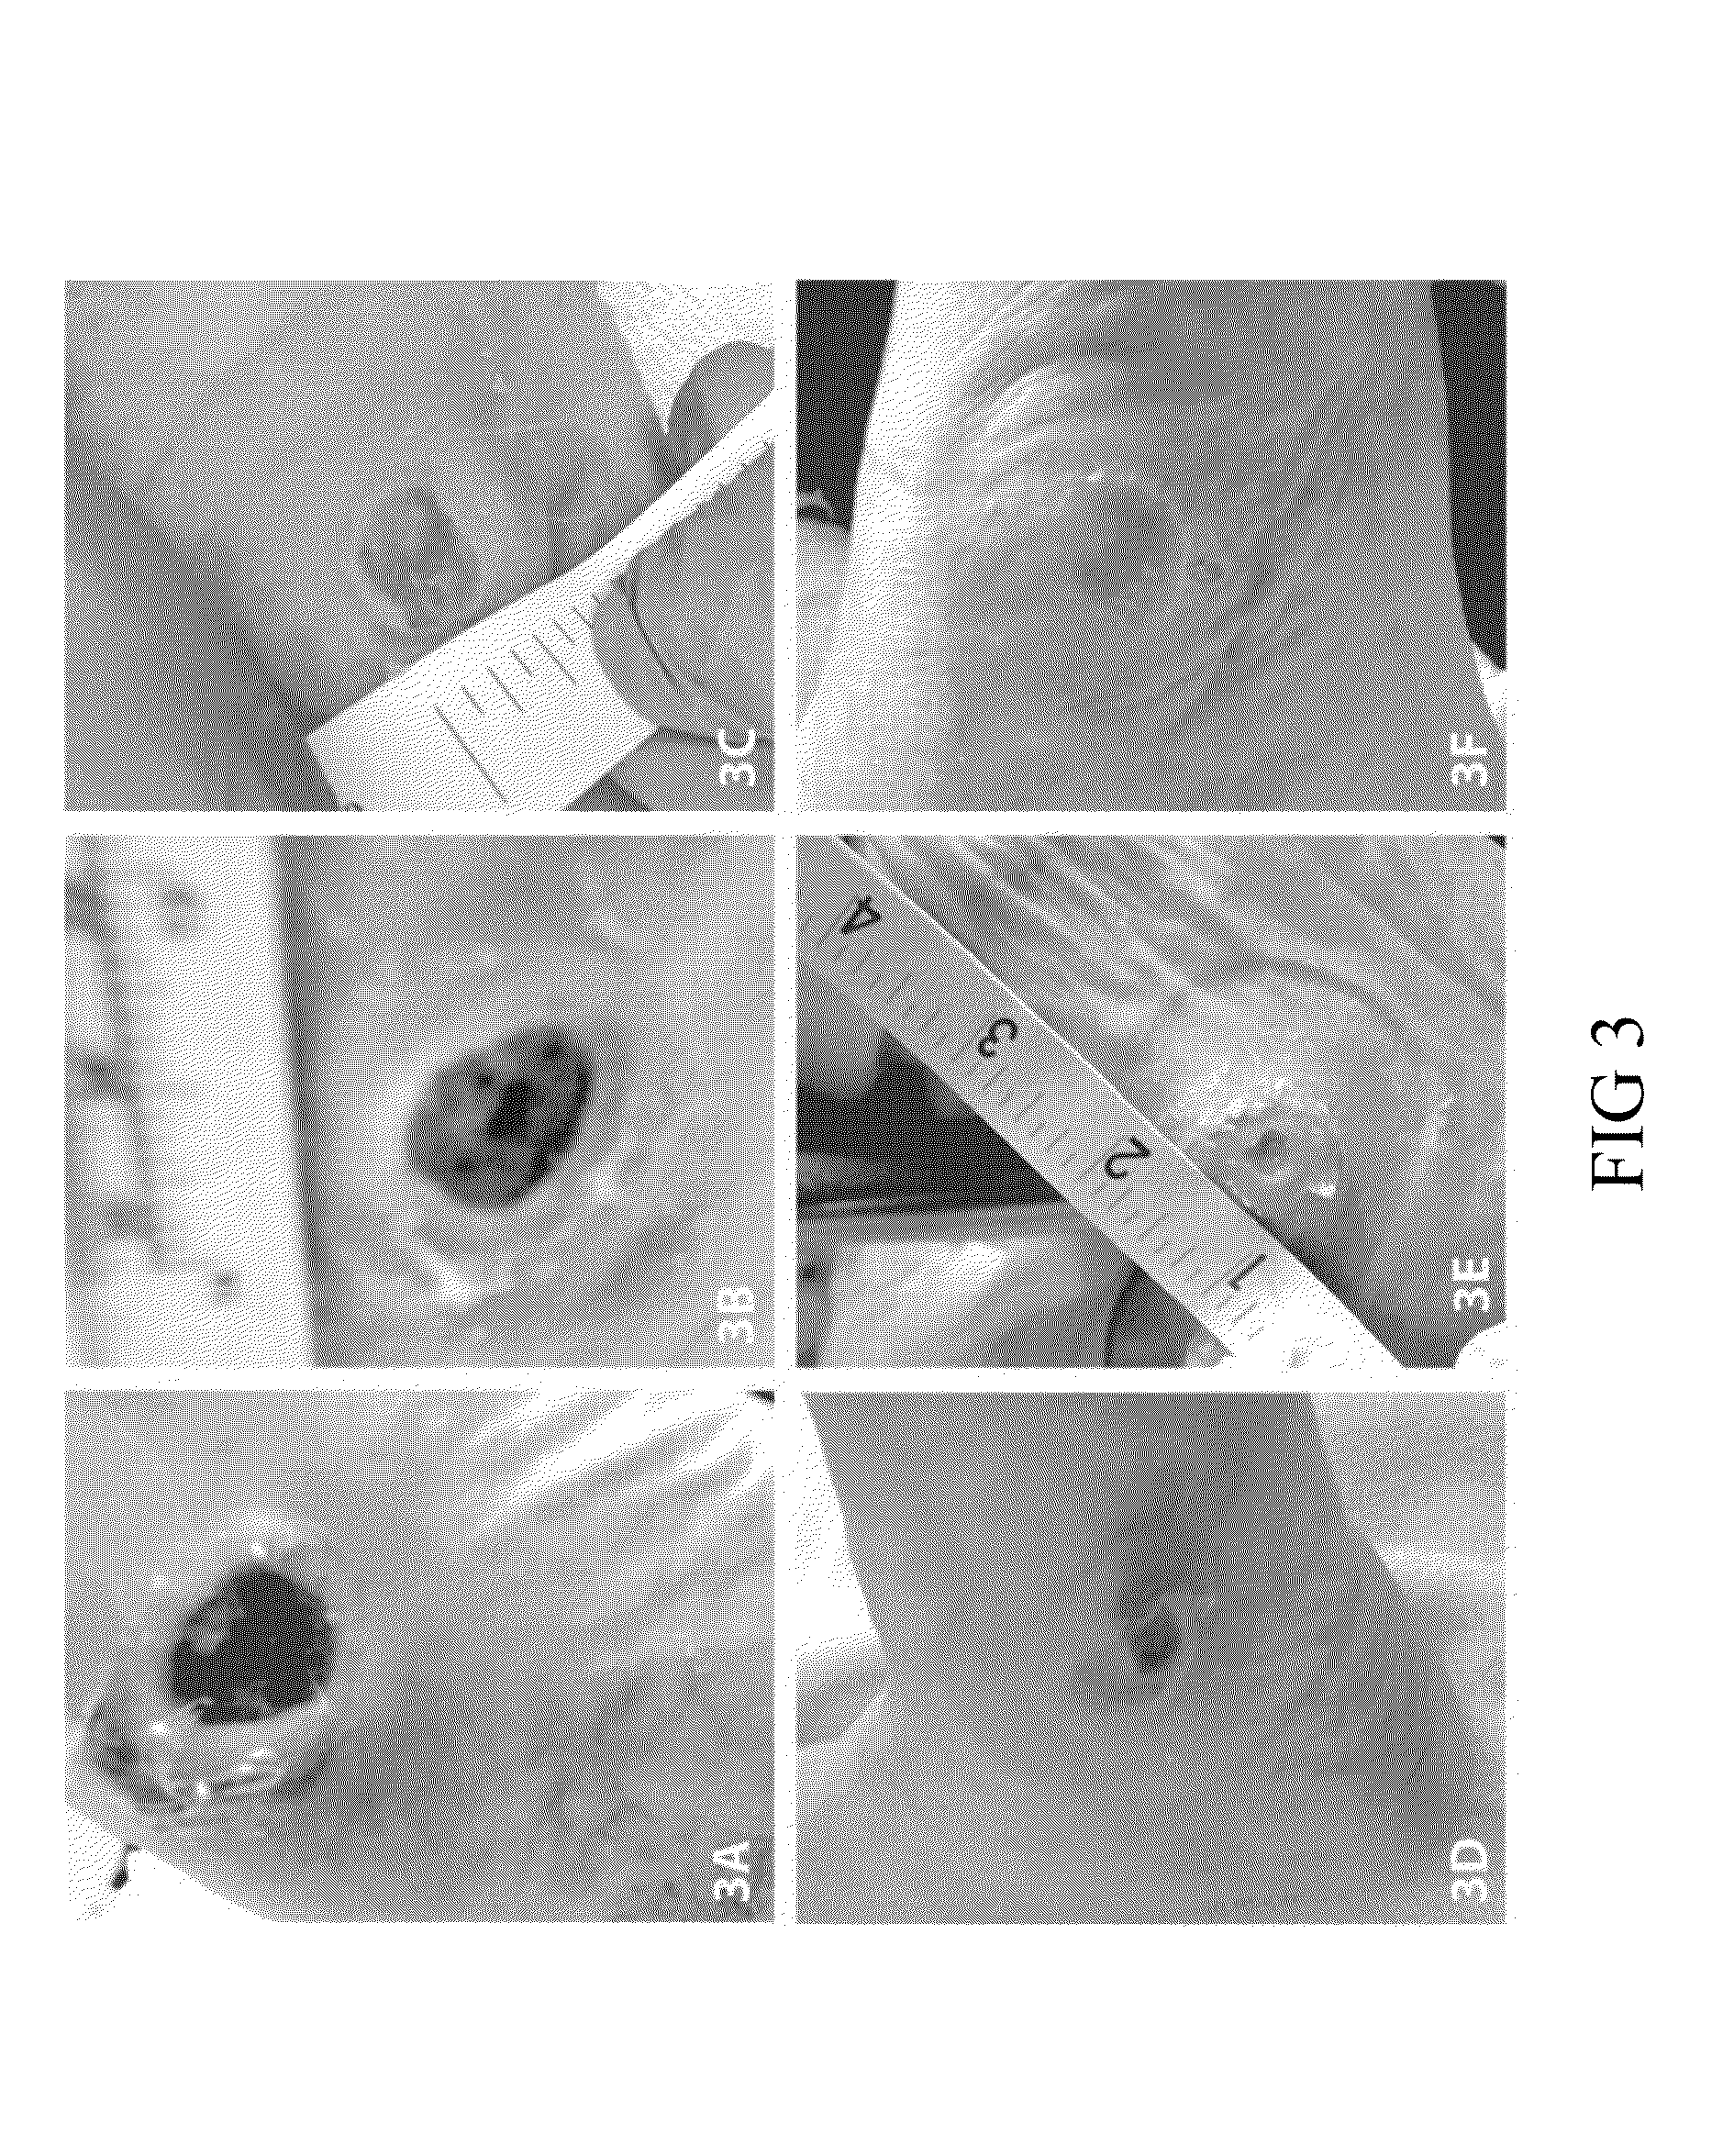 Wound Healing Compositions Involving Medicinal Honey, Mineral ions, and Methylglyoxal, and Methods of Use